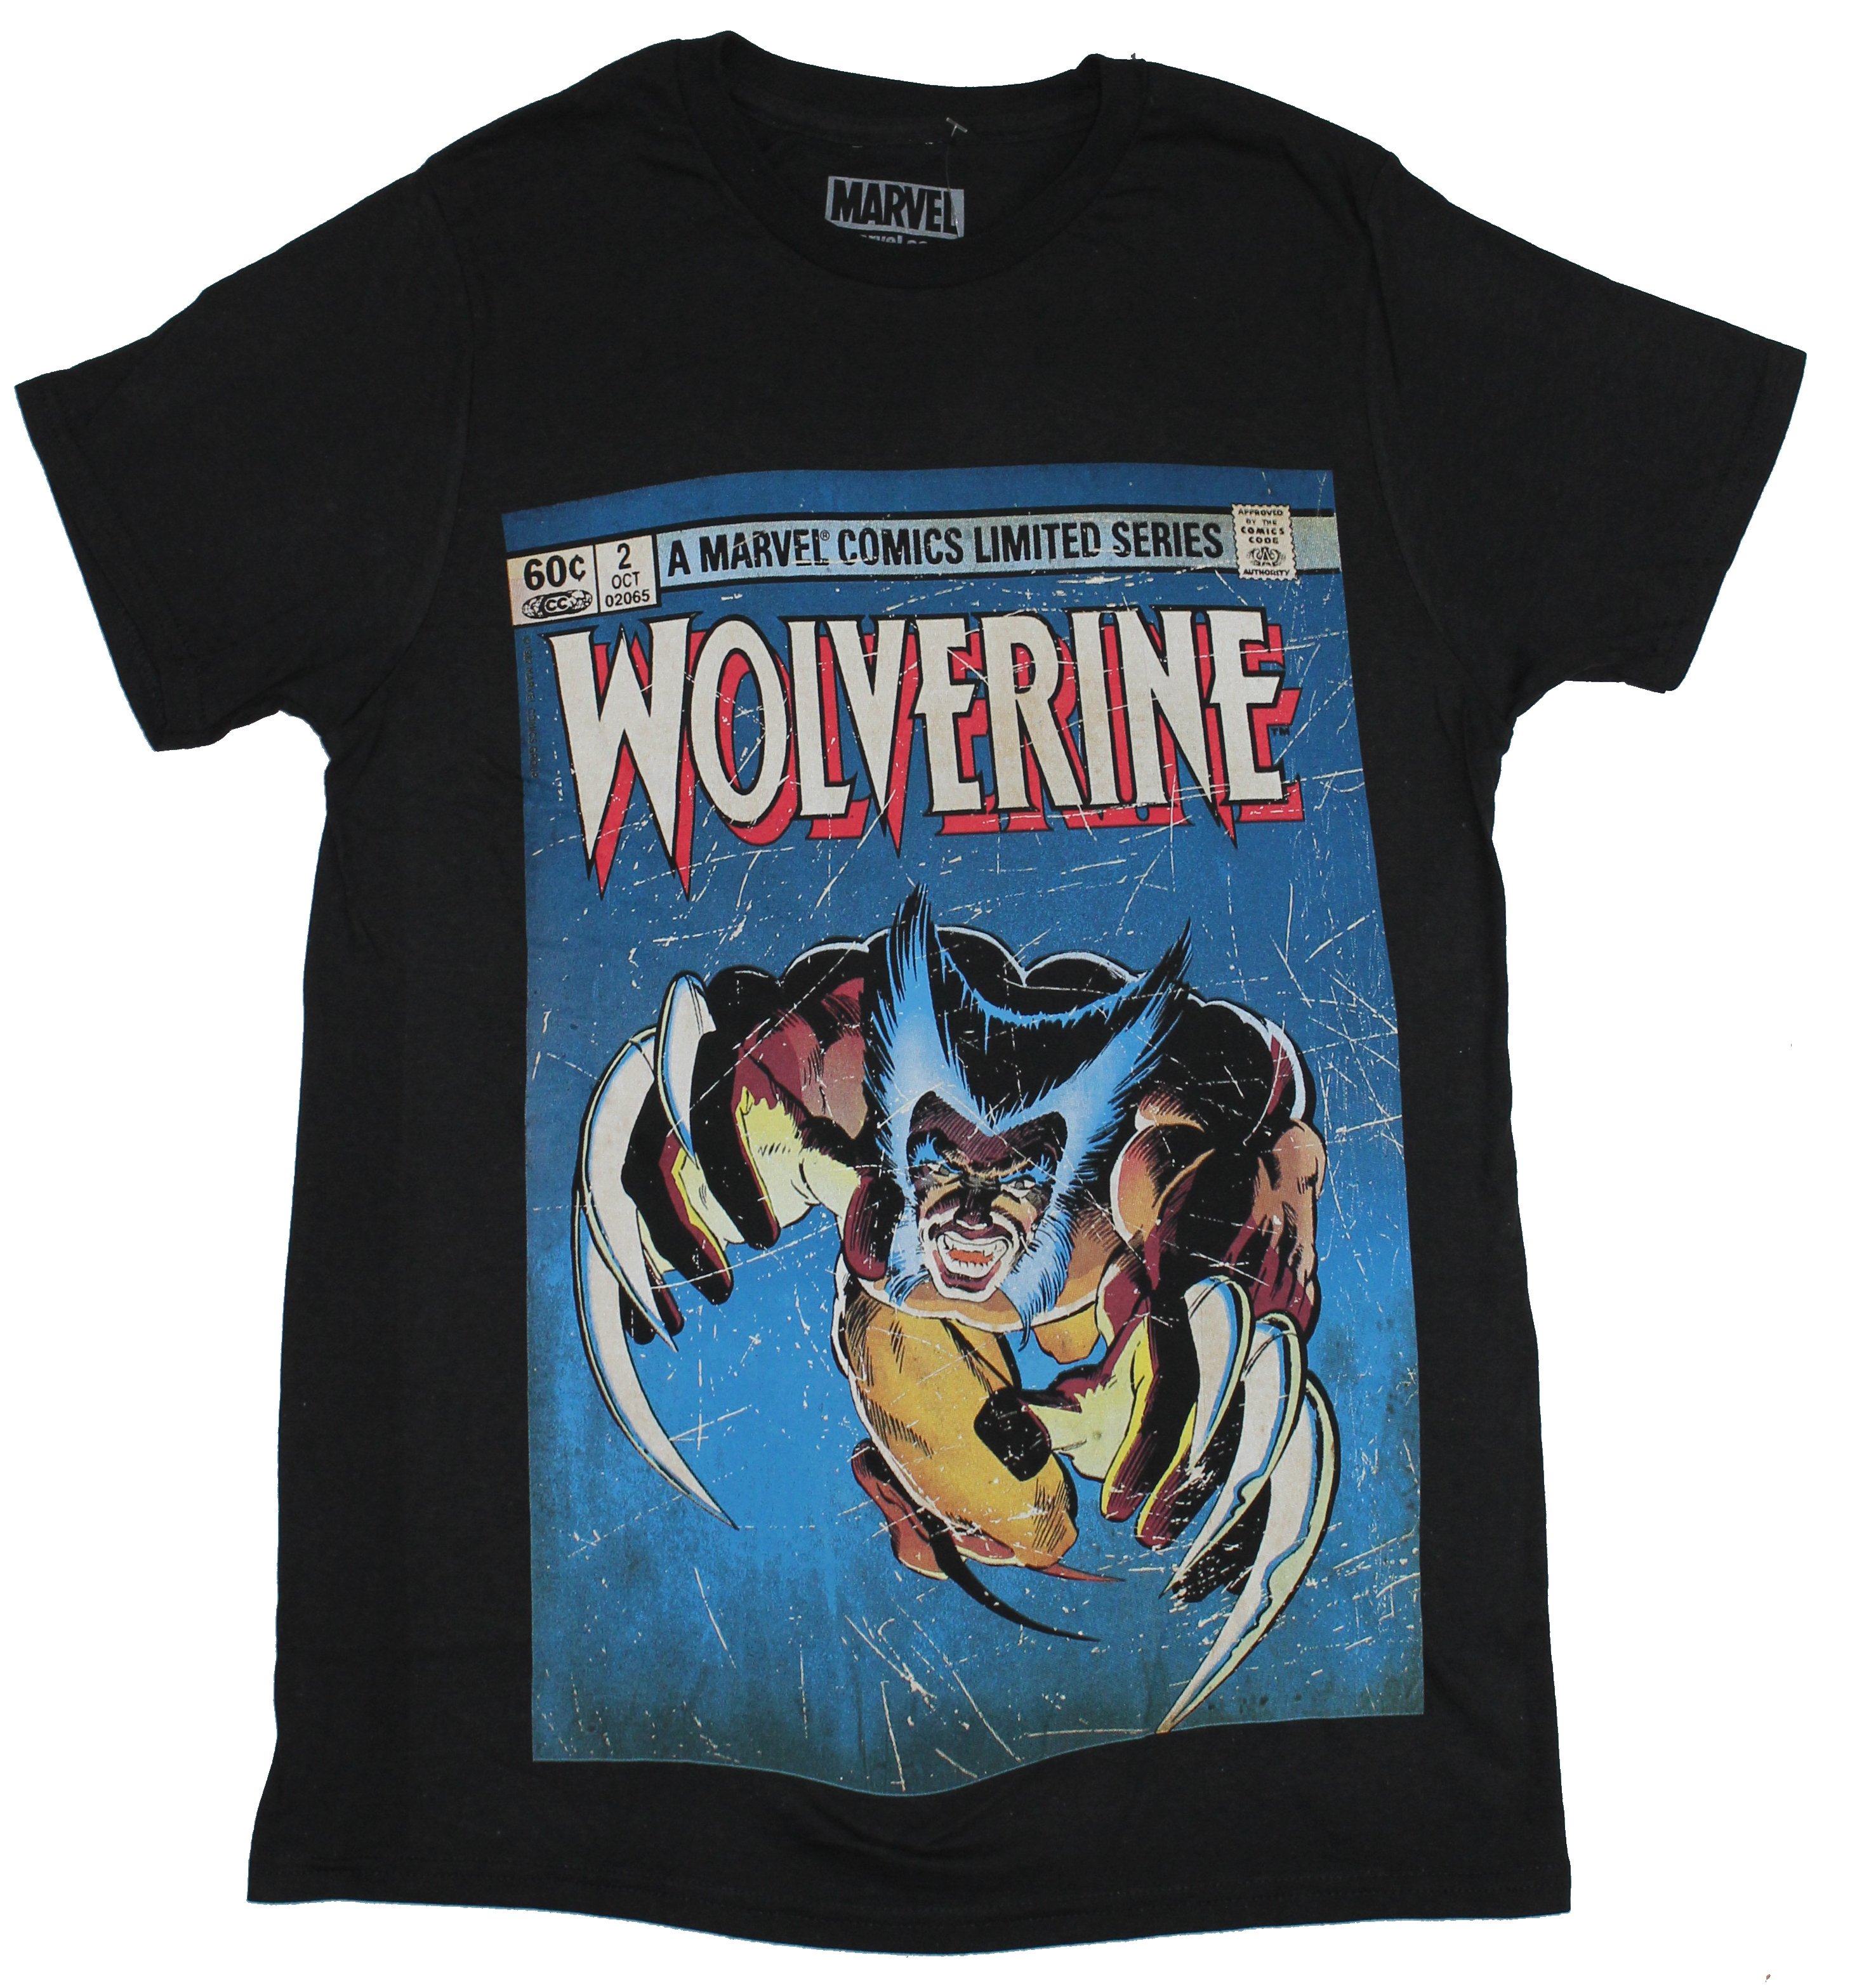 Wolverine (Marvel) Mens T-Shirt - Issue 2 Limited Series Cover Issue | eBay